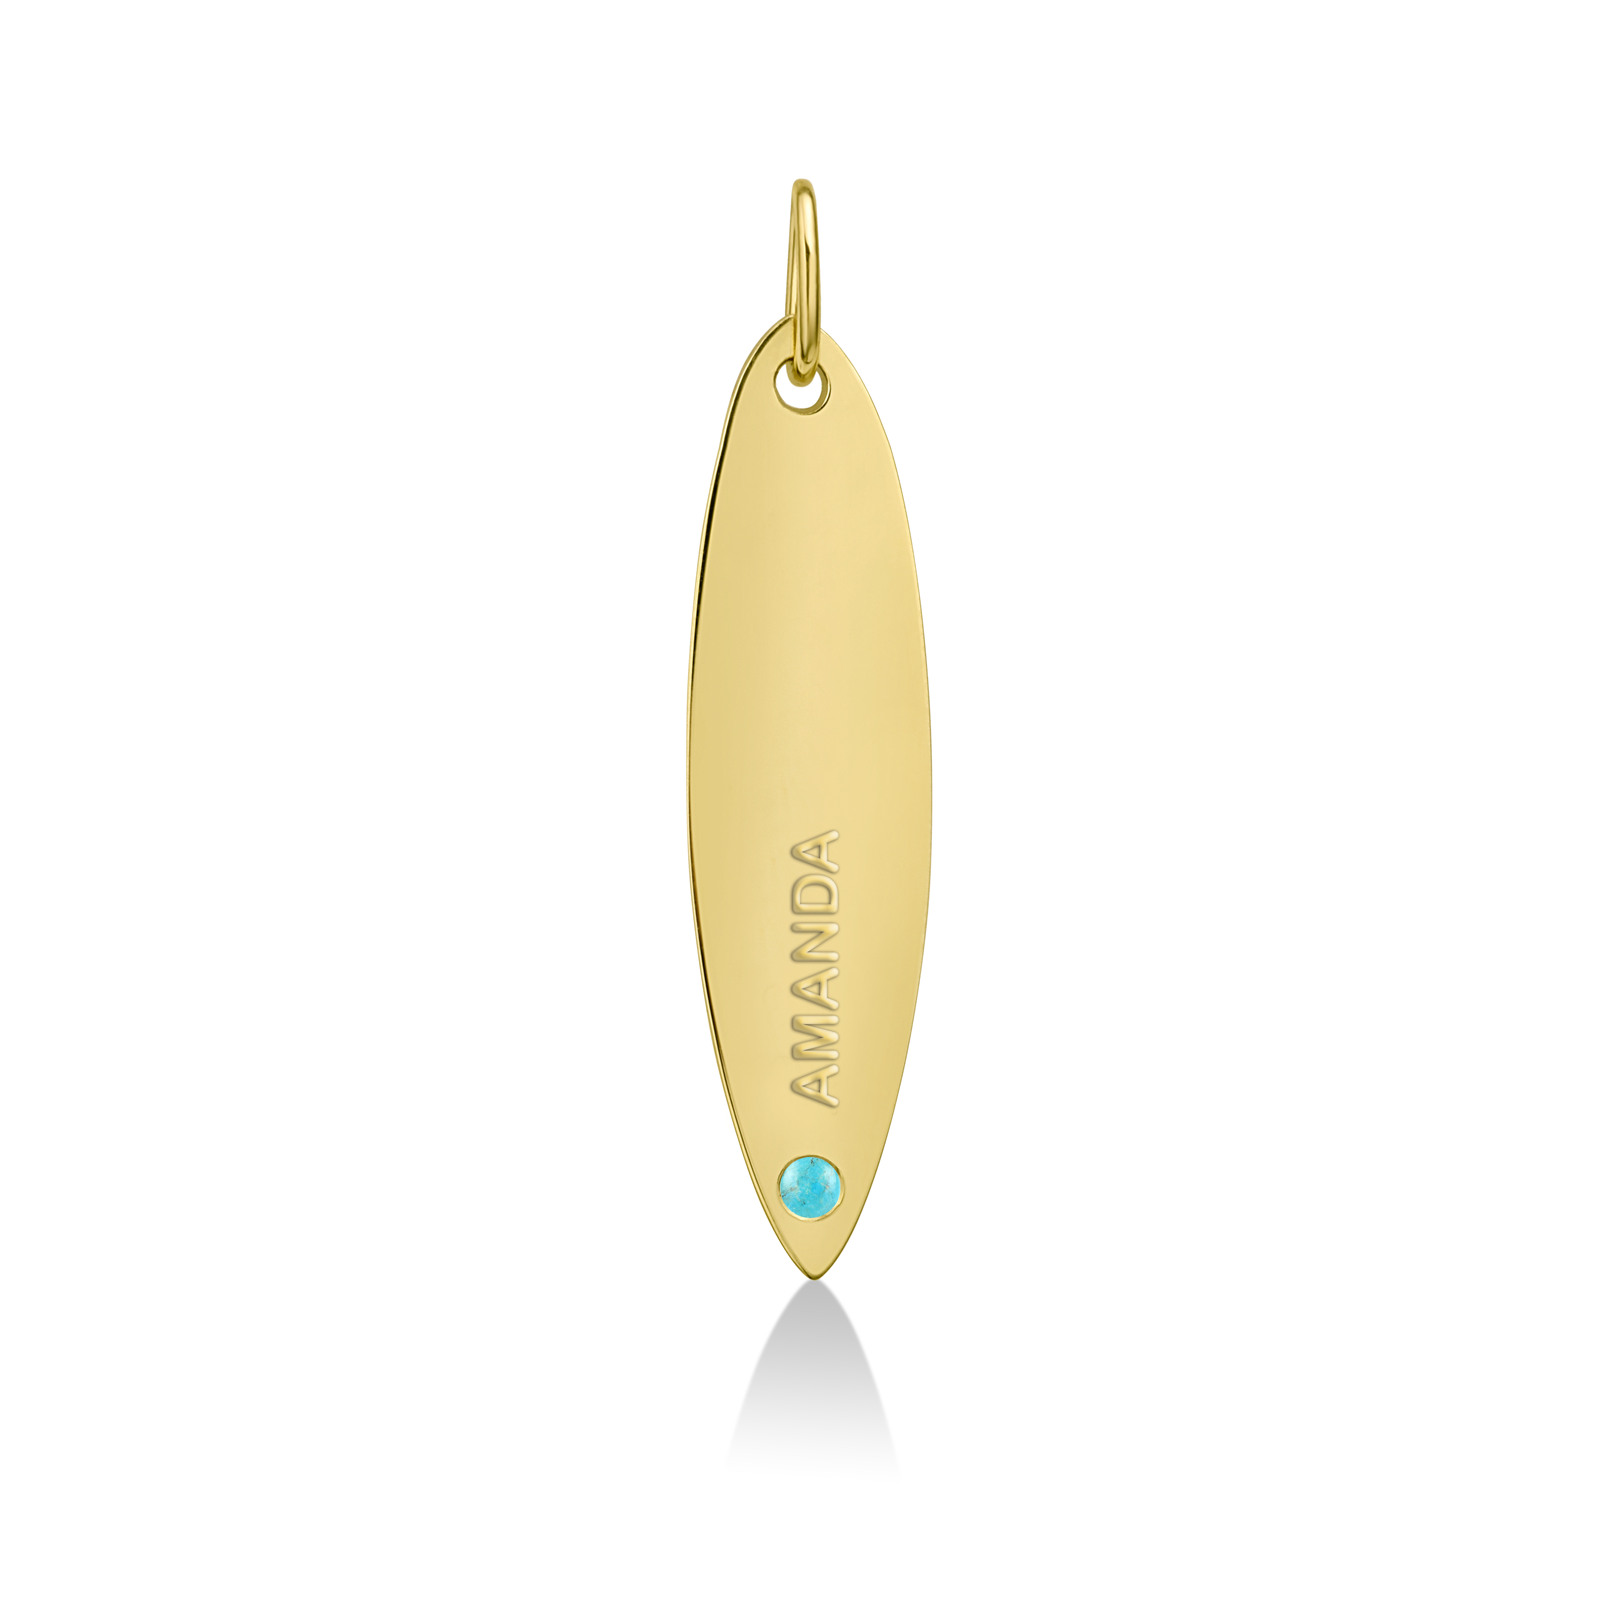 14k gold surfboard charm lock with AMANDA engraved and turquoise